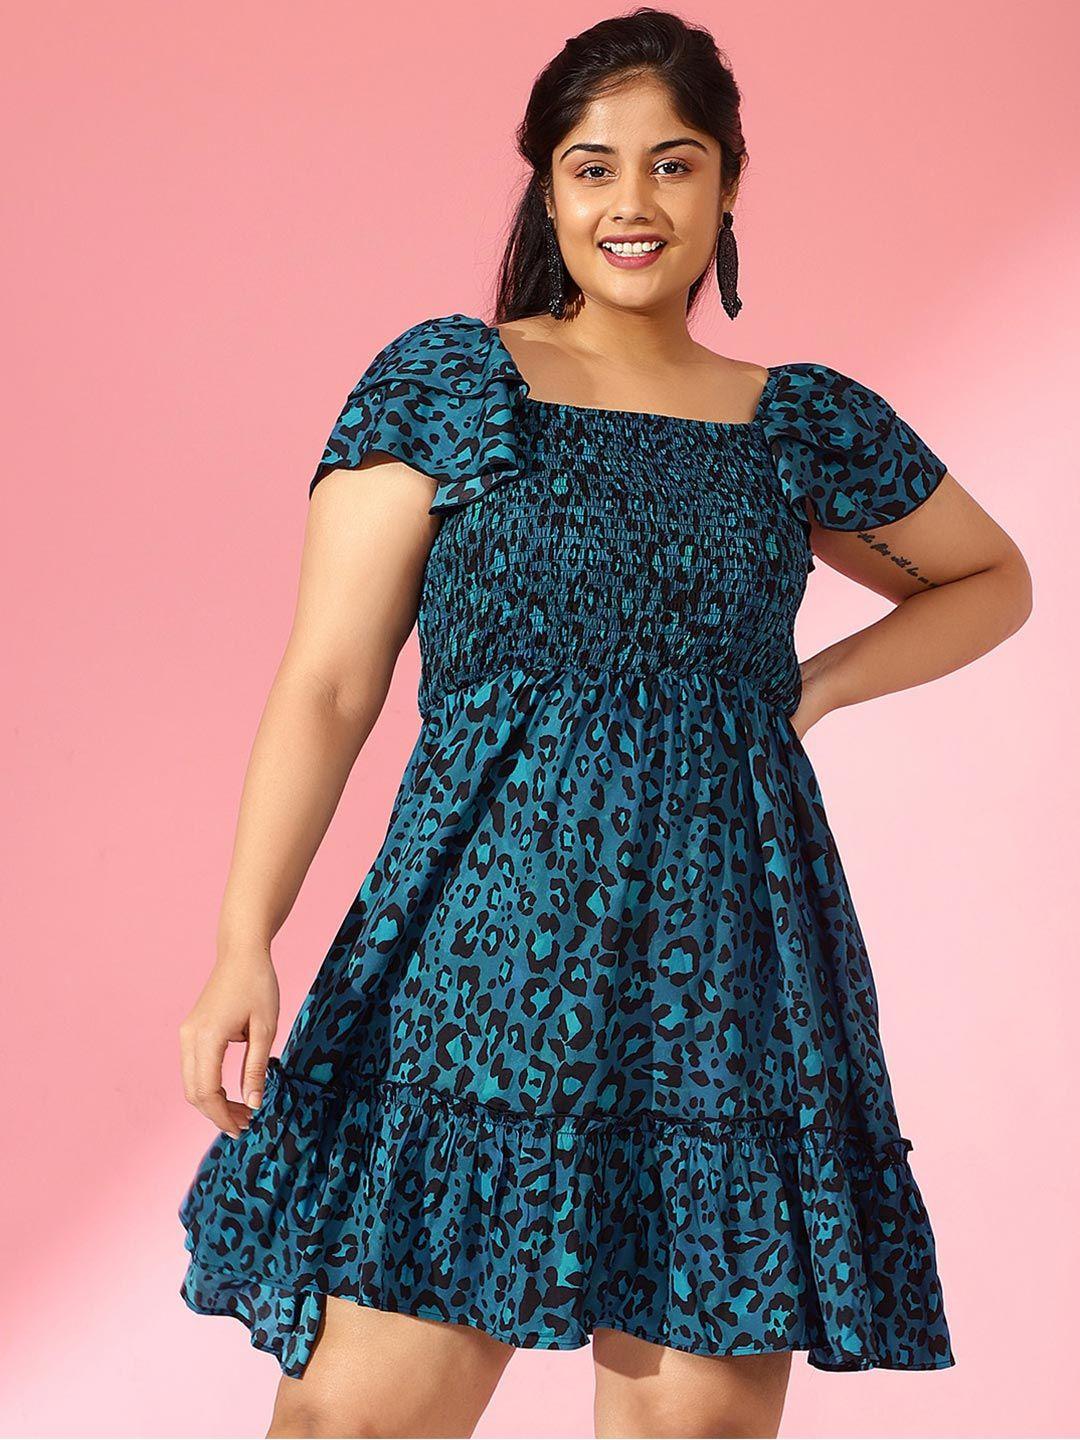 curve by kassually teal & black animal printed flutter sleeves fit & flare dress